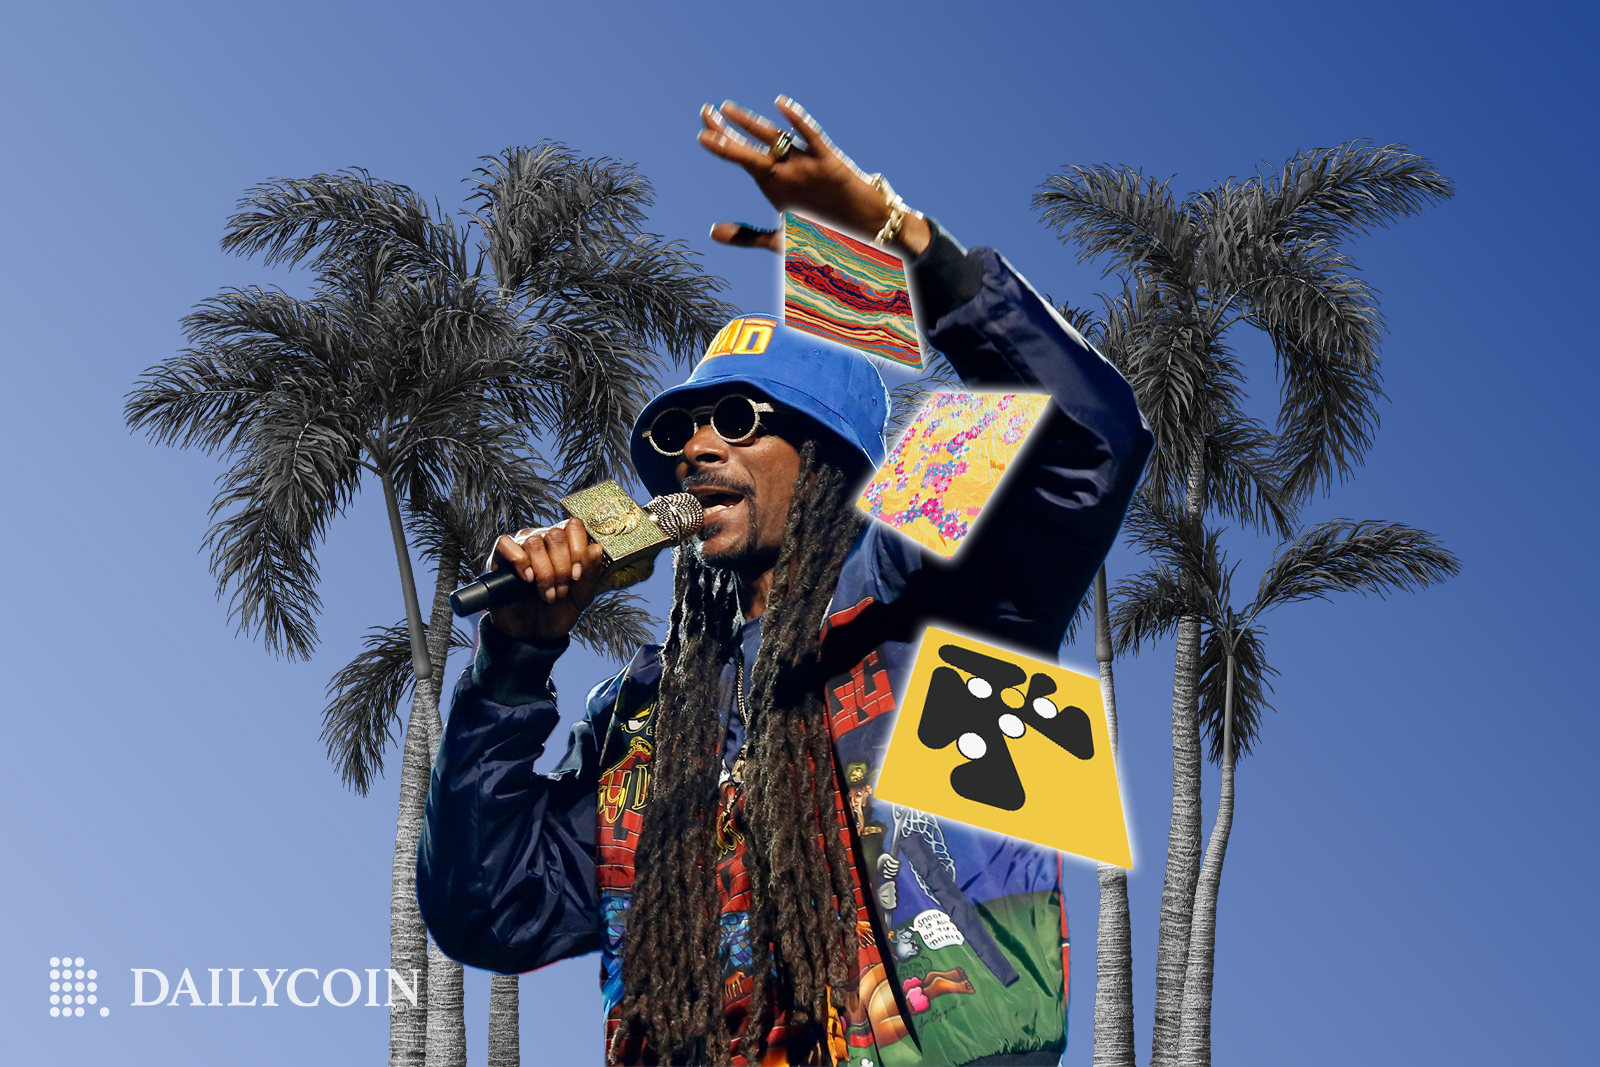 Rapper Snoop Dogg in a blue bucket hat, singing with a microphone and handing out free NFTs in palm tree background.